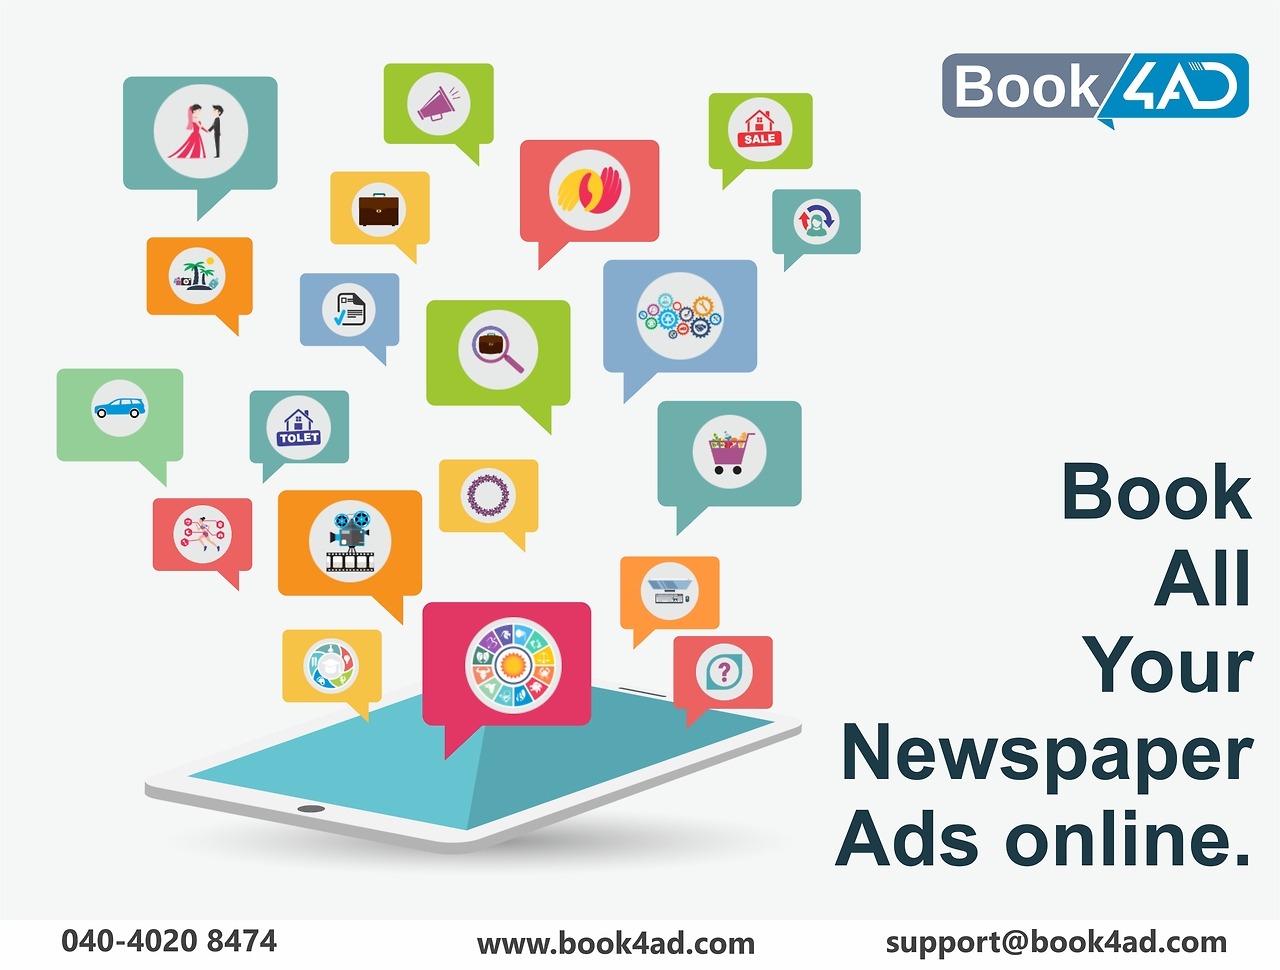 Book4ad: Newspaper Advertising Online Reservations at Very Low Rates